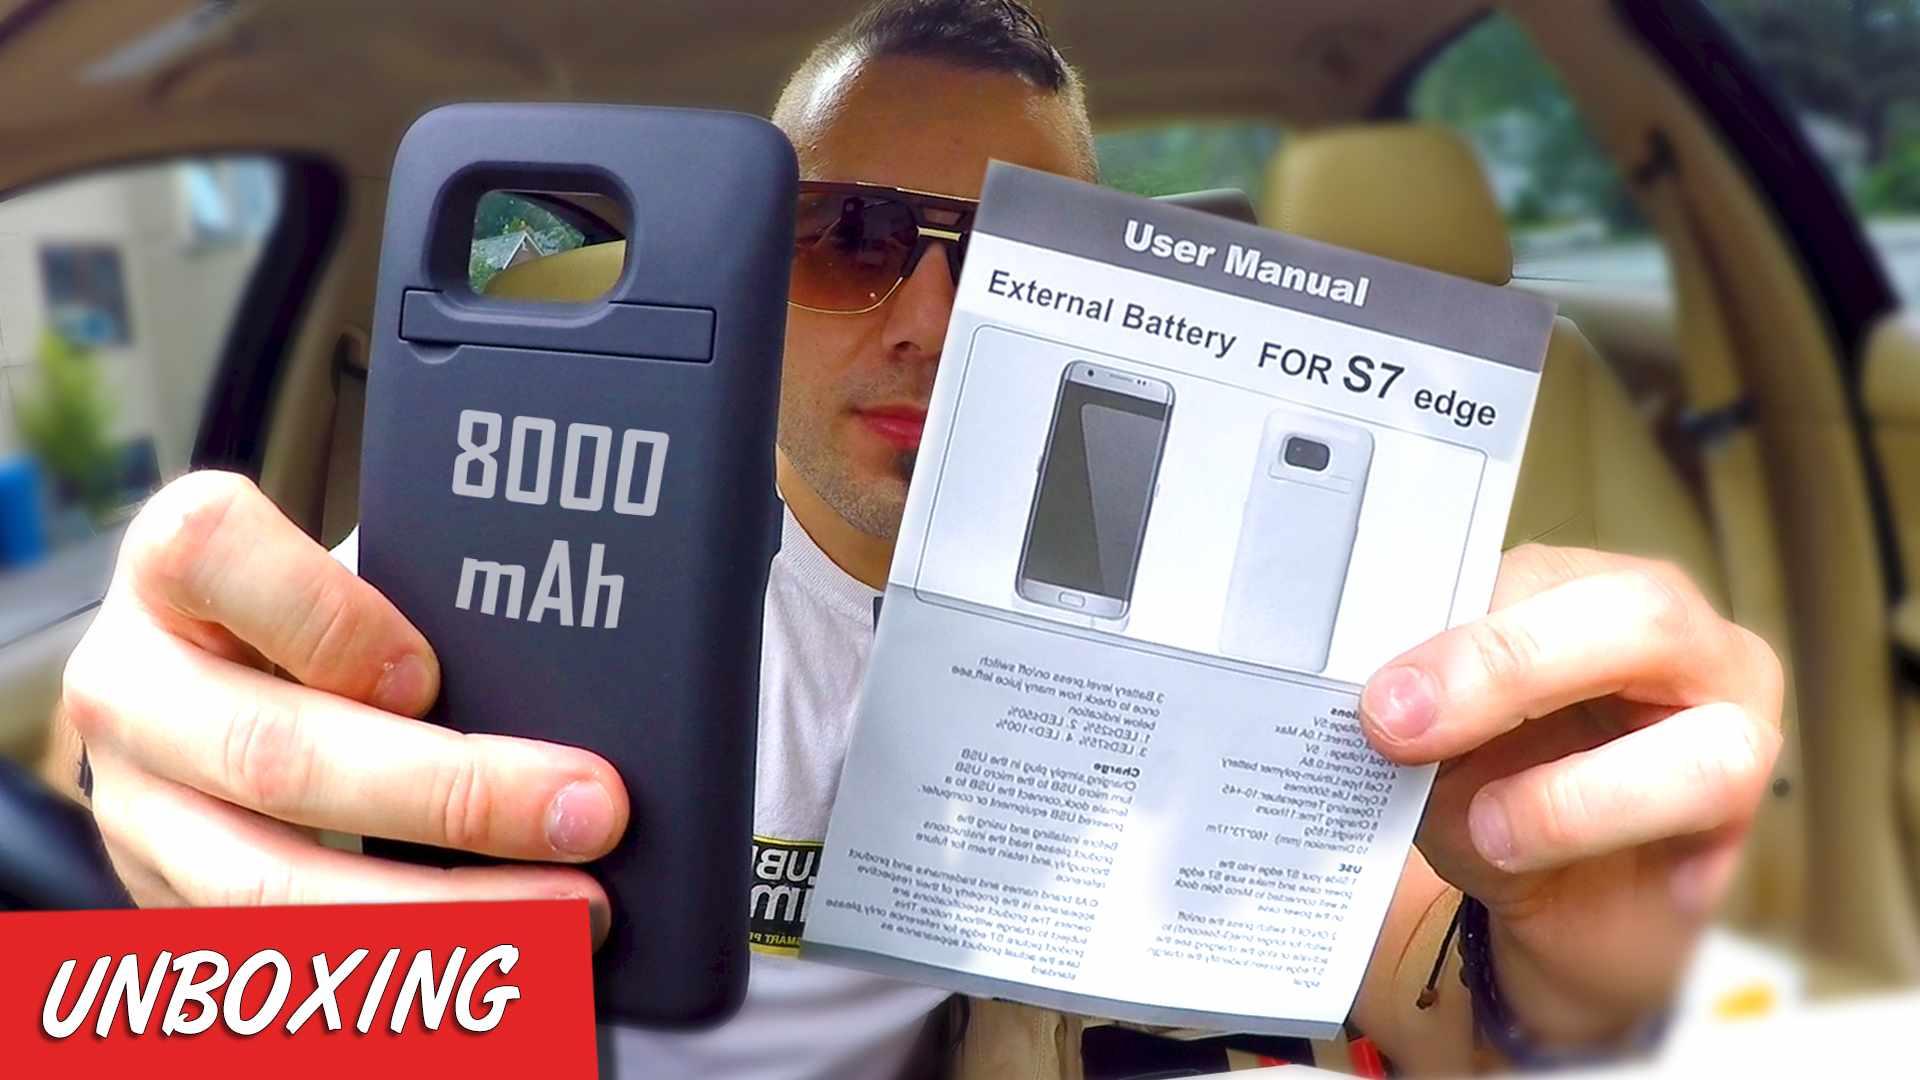 External 8000 mAh Battery for S7 Edge Unboxing & Review : Top Battery Case under $40